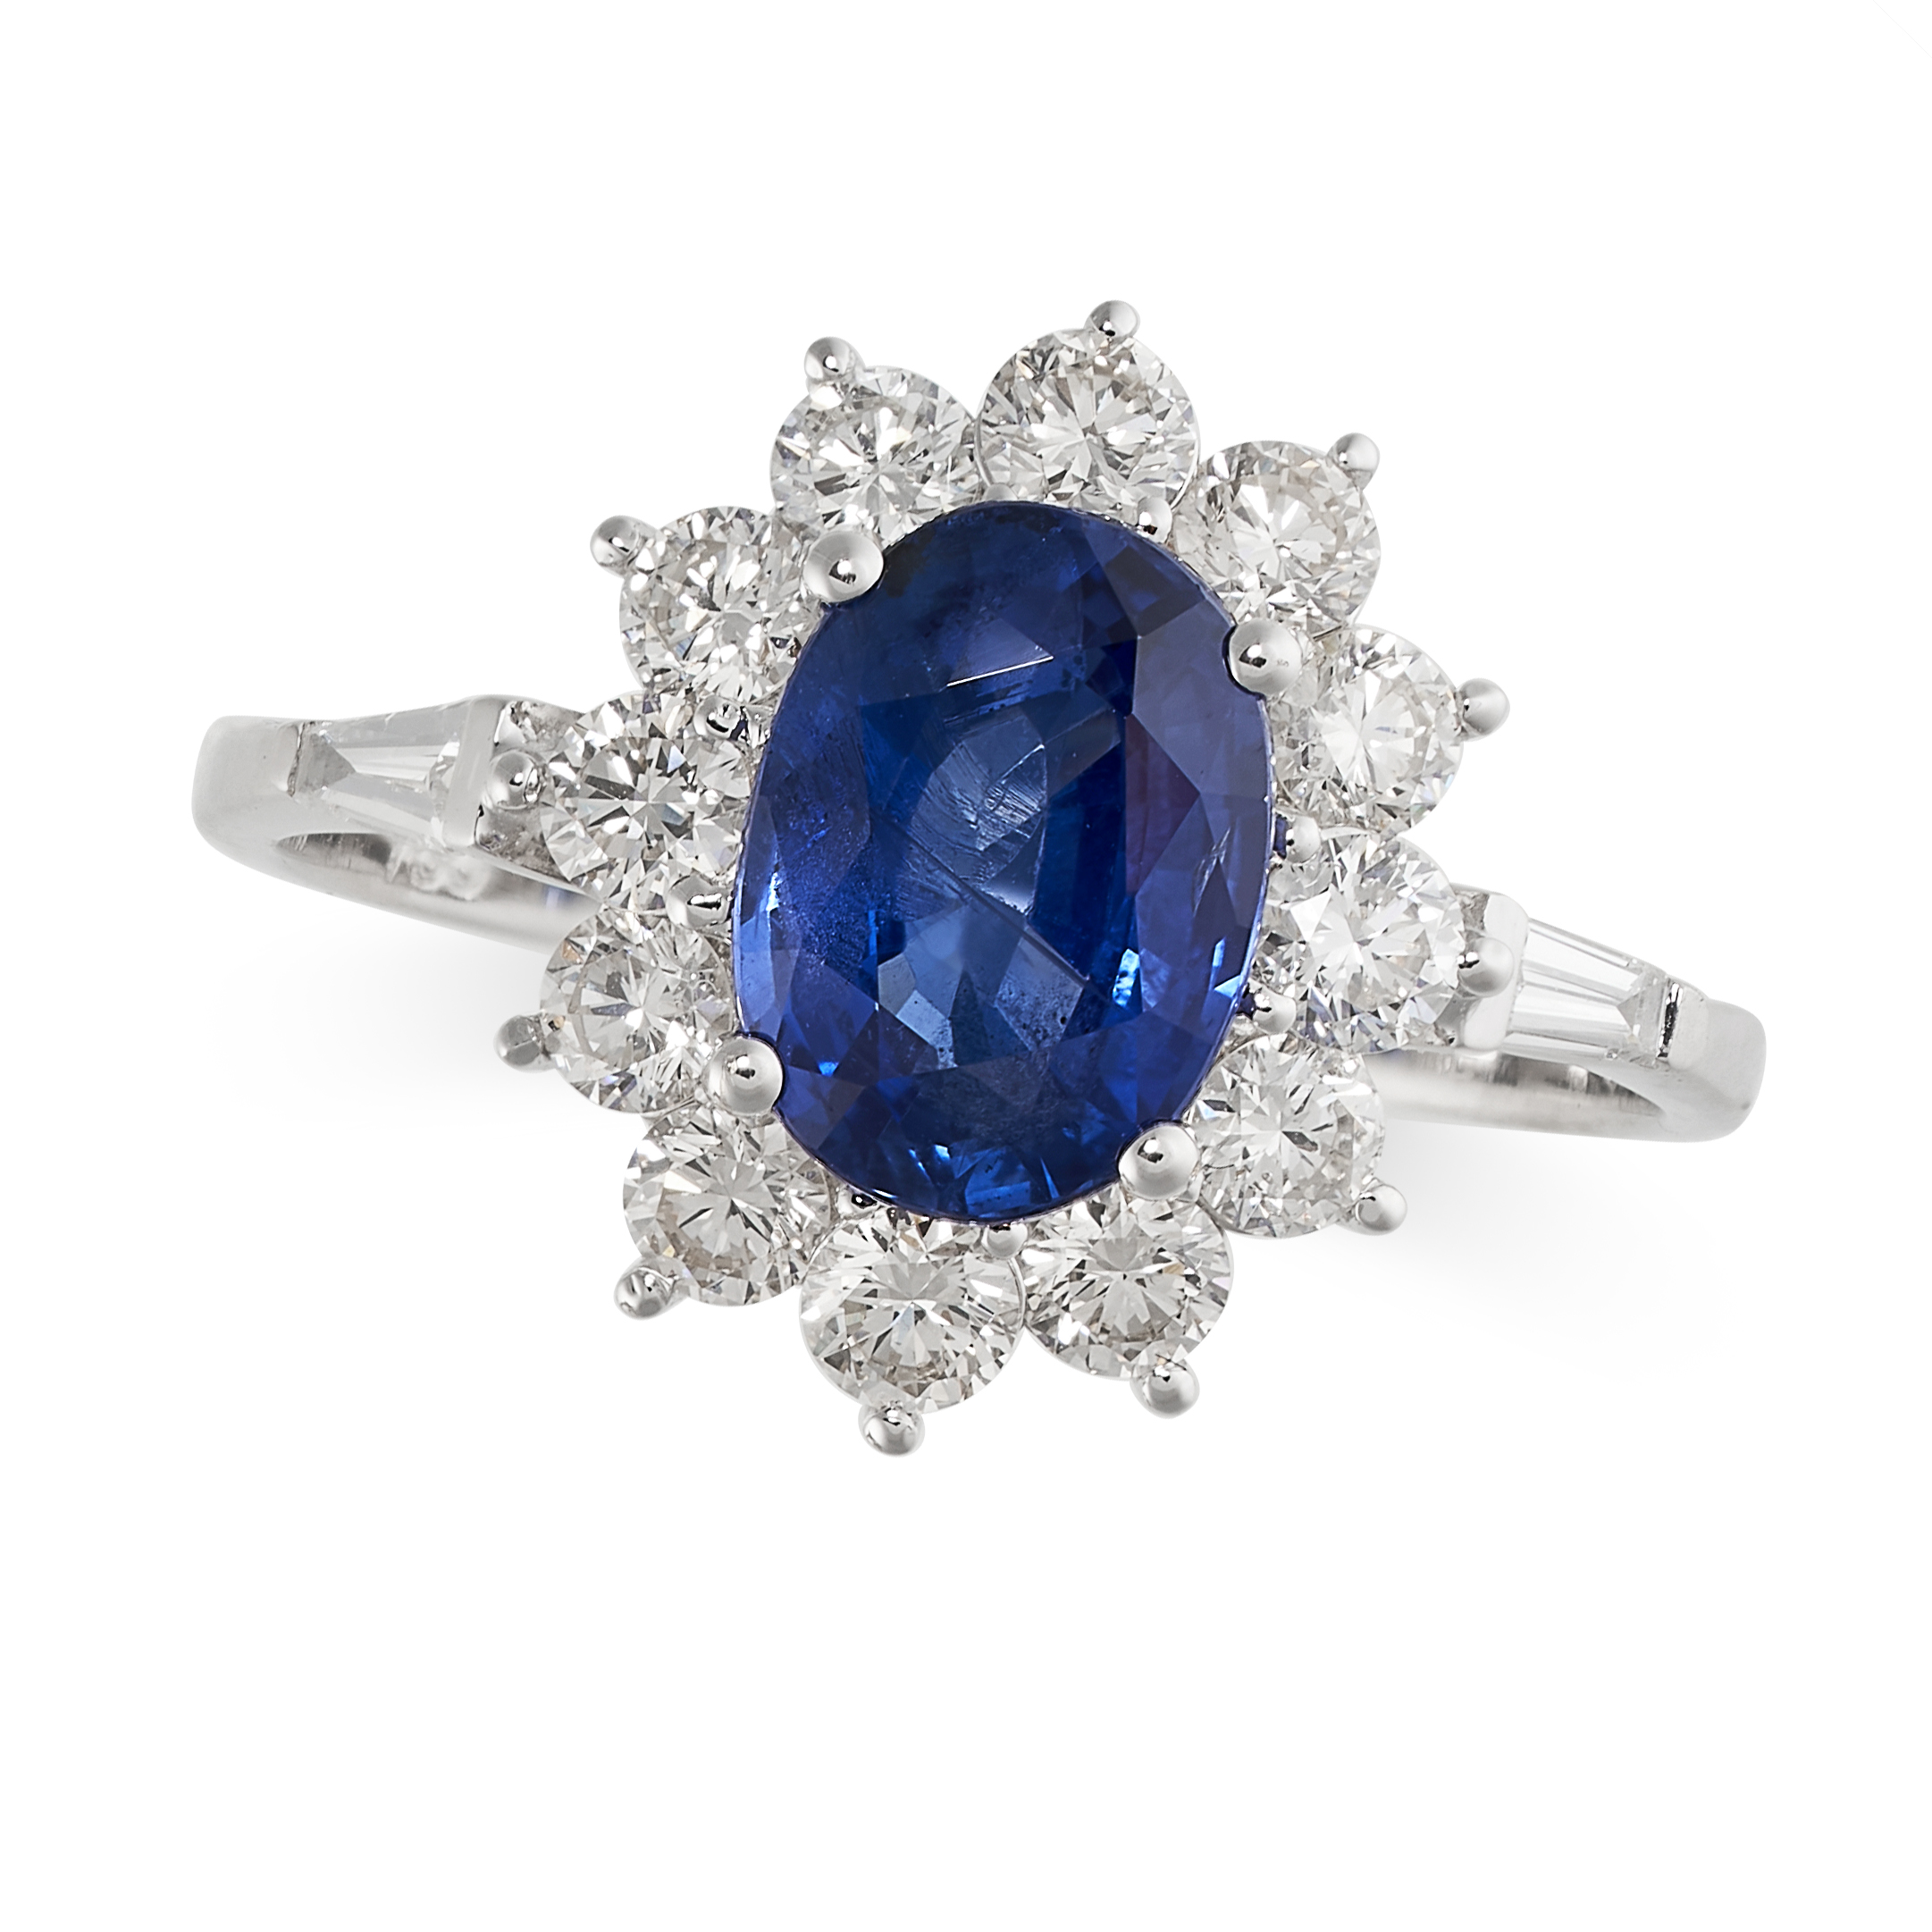 A SAPPHIRE AND DIAMOND CLUSTER RING in 18ct white gold, set with an oval cut blue sapphire of 2.14